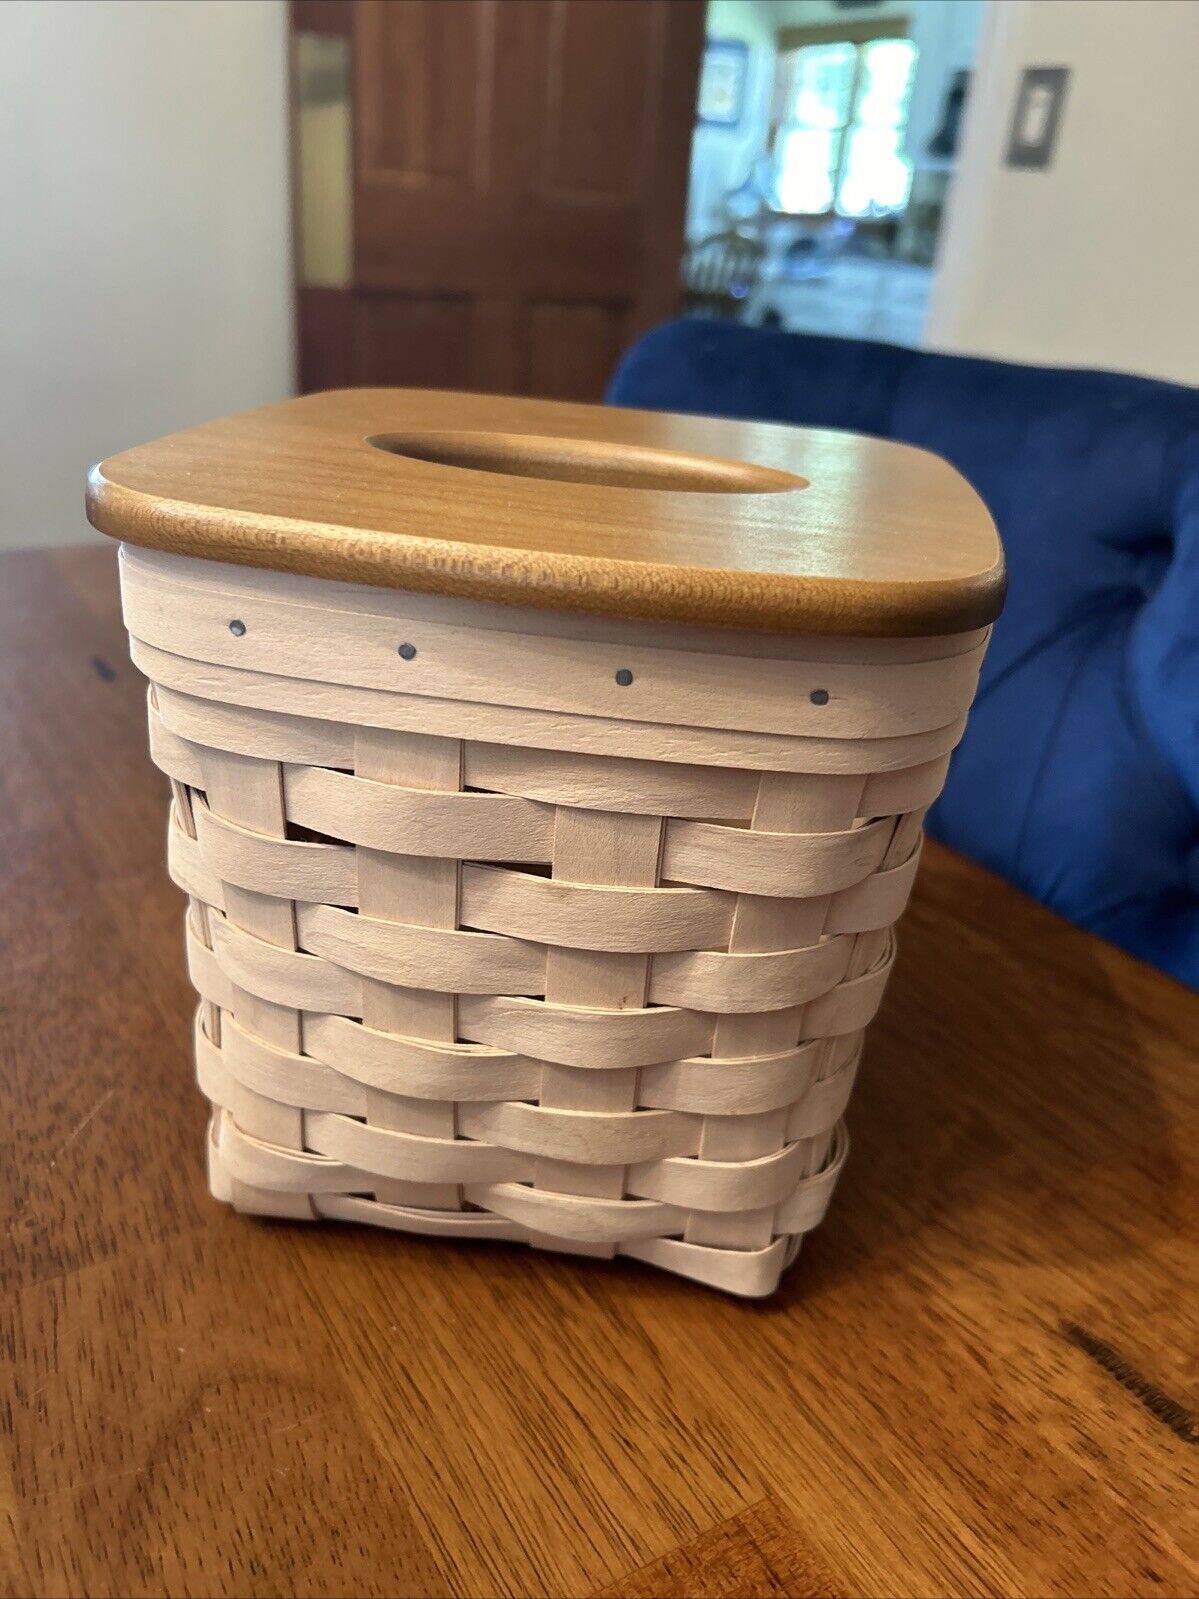 Longaberger 2004 Whitewashed Tall Tissue Basket, Protector & Brown Wooden Lid.